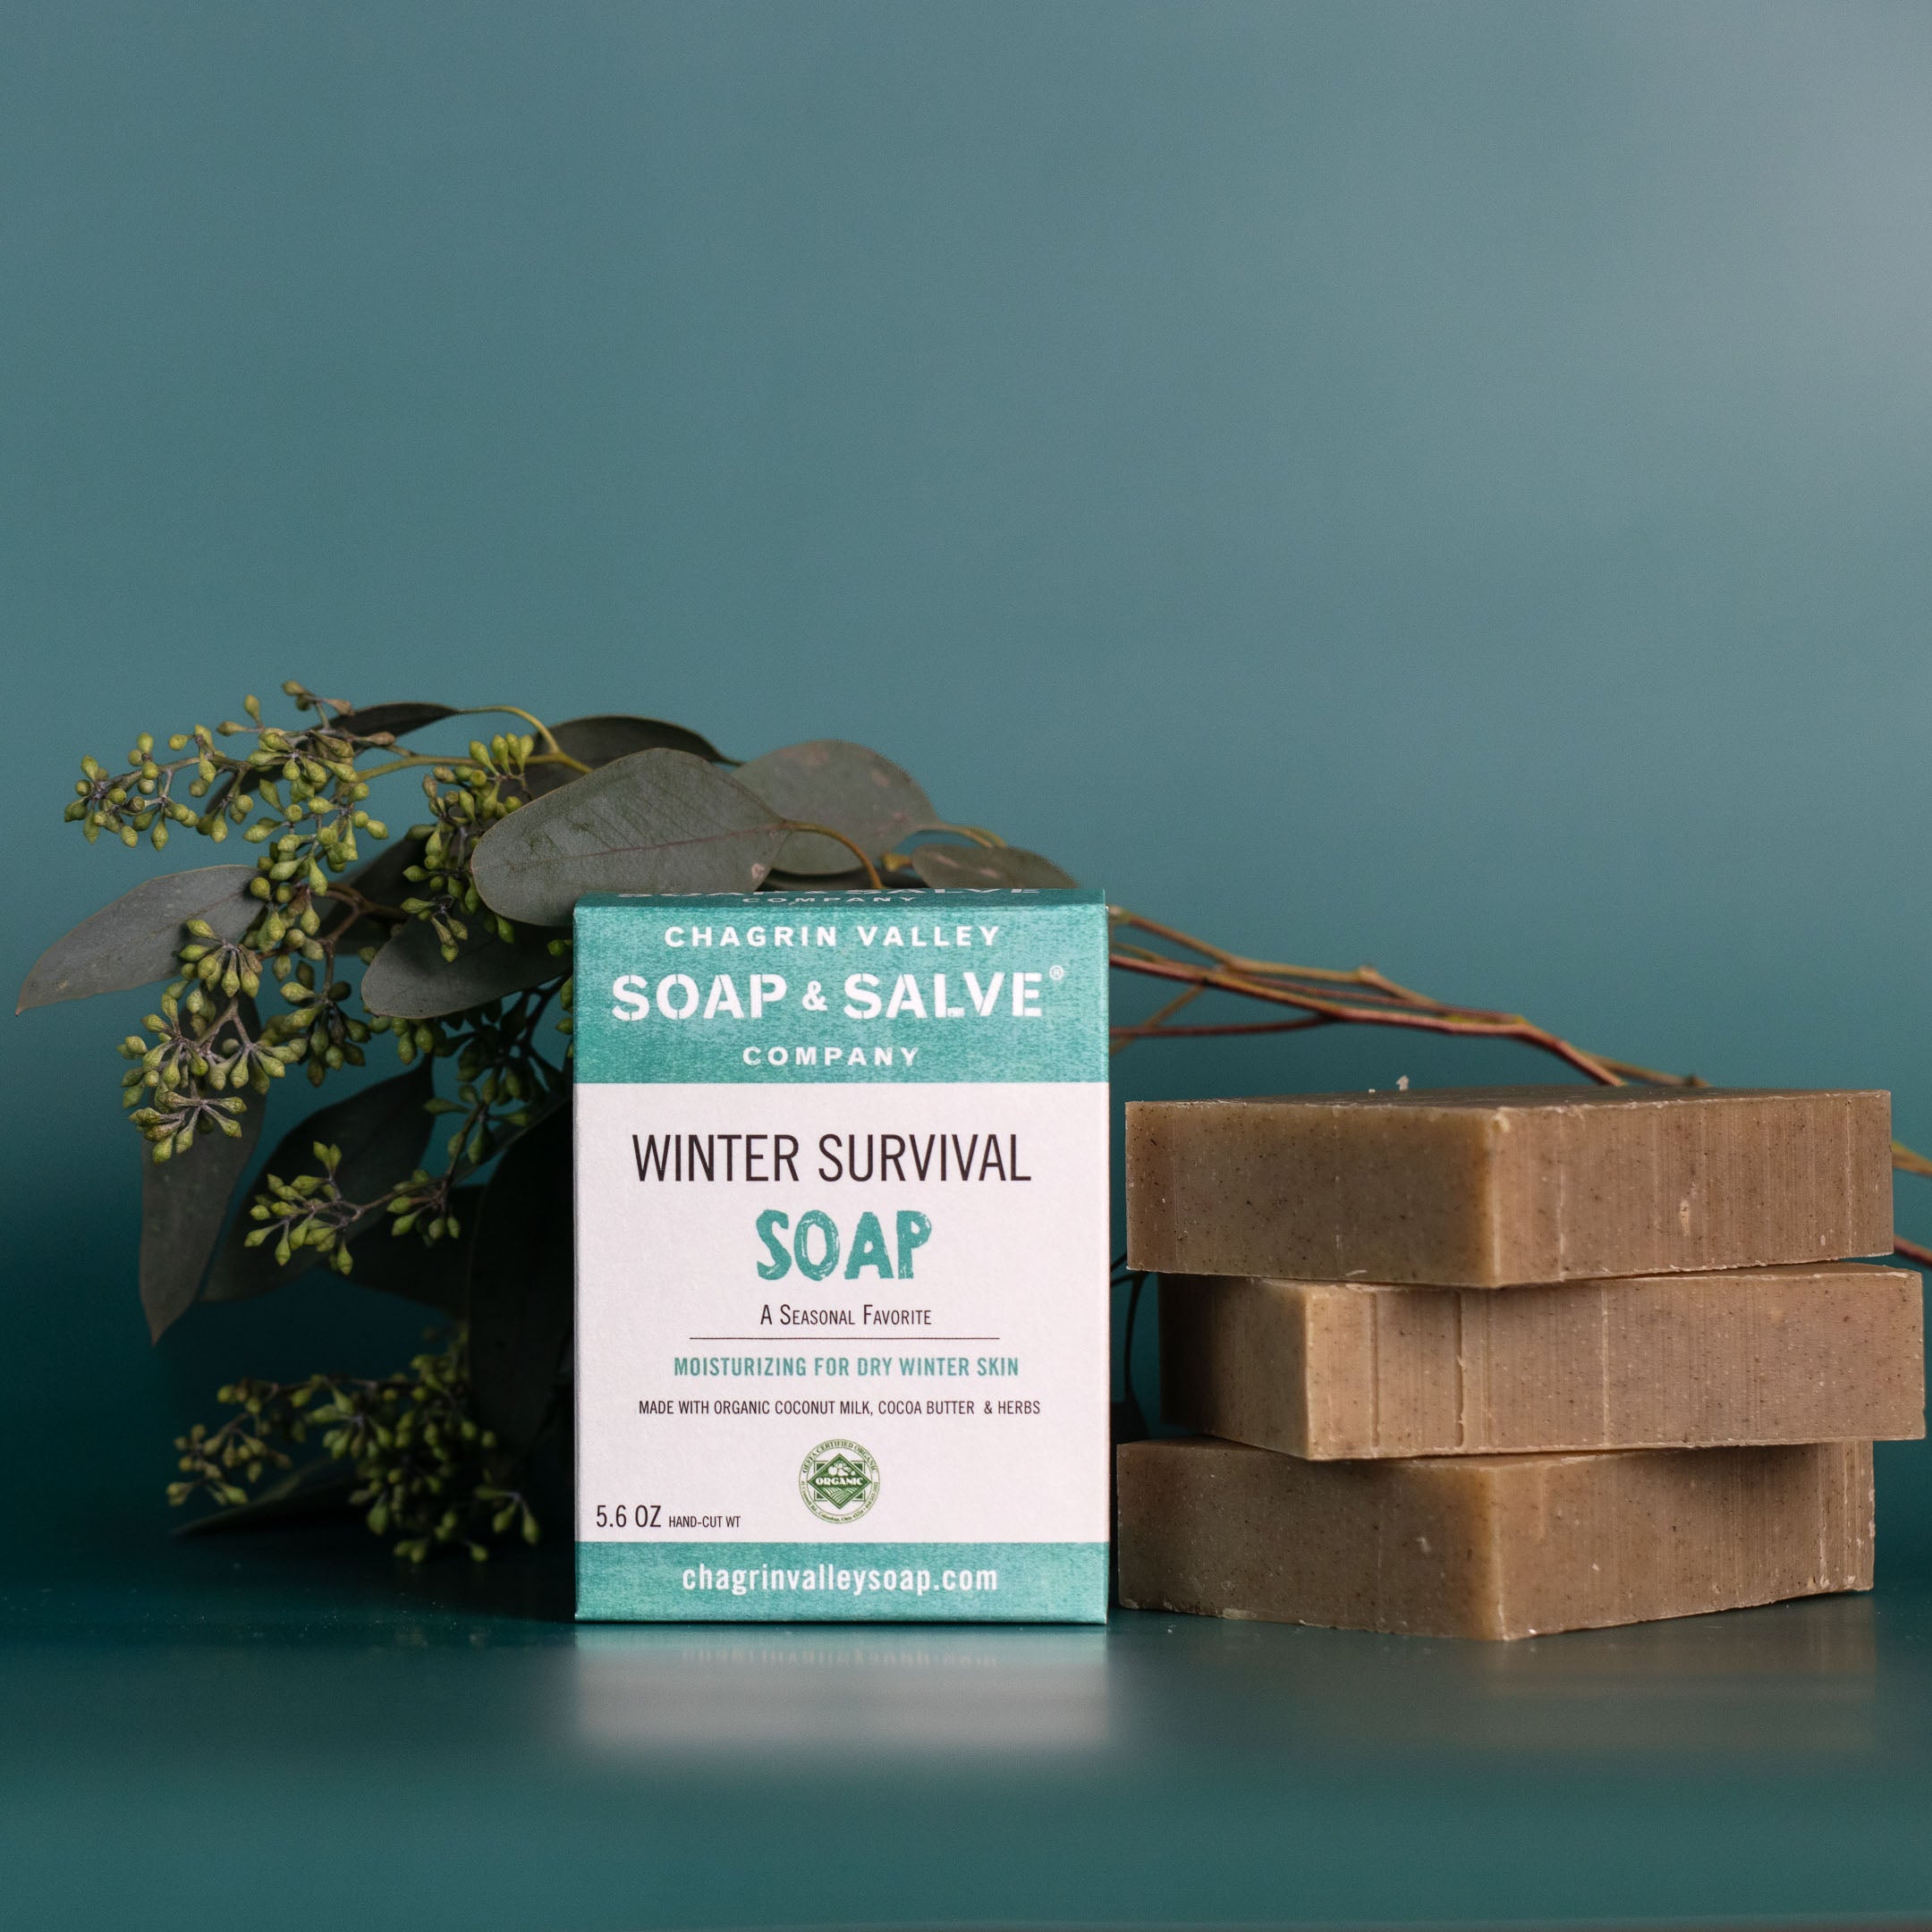 Baby Me! Bath Herbs and Herbal Washcloth – Chagrin Valley Soap & Salve